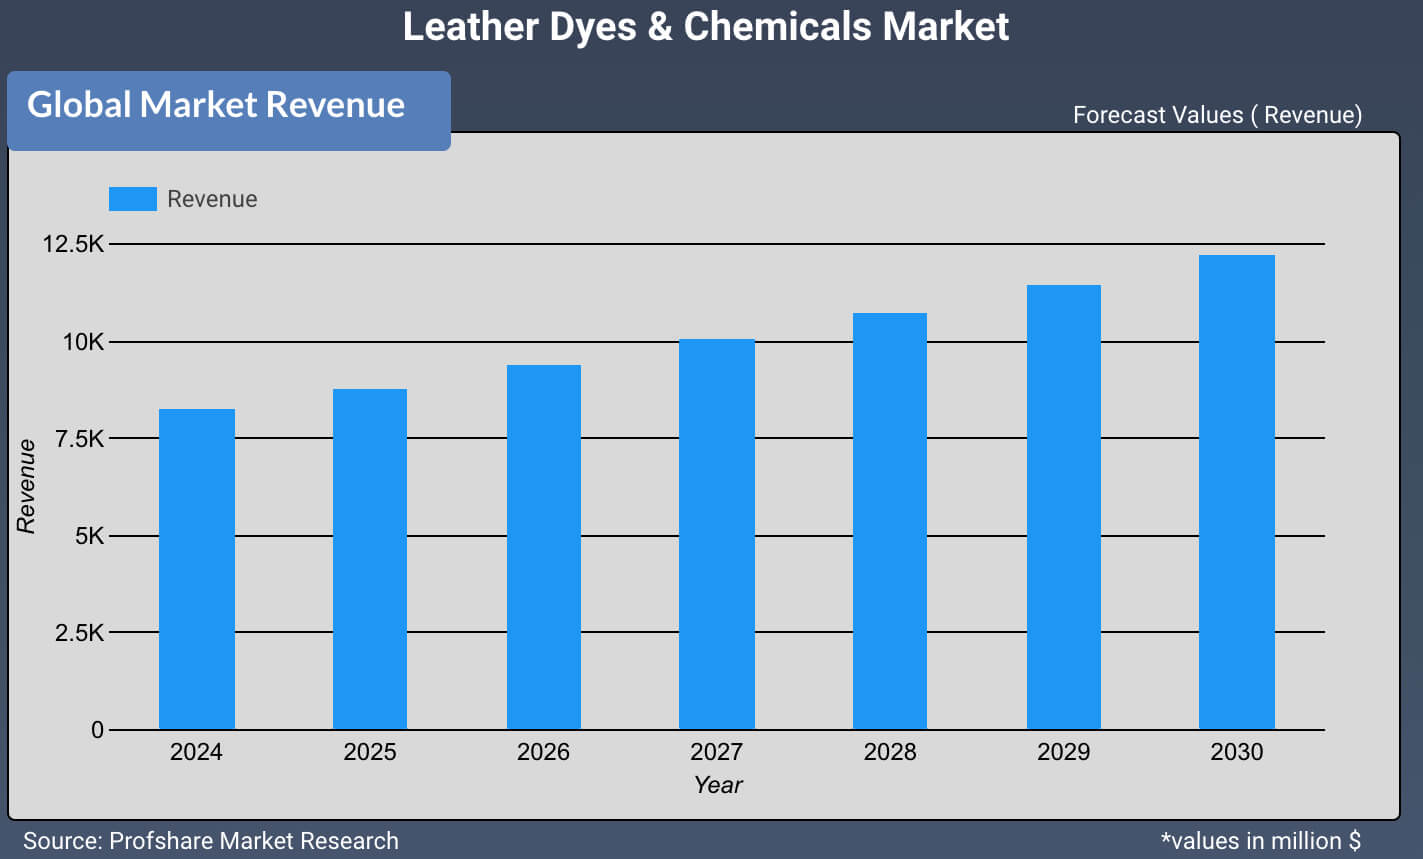 Leather Dyes & Chemicals Market